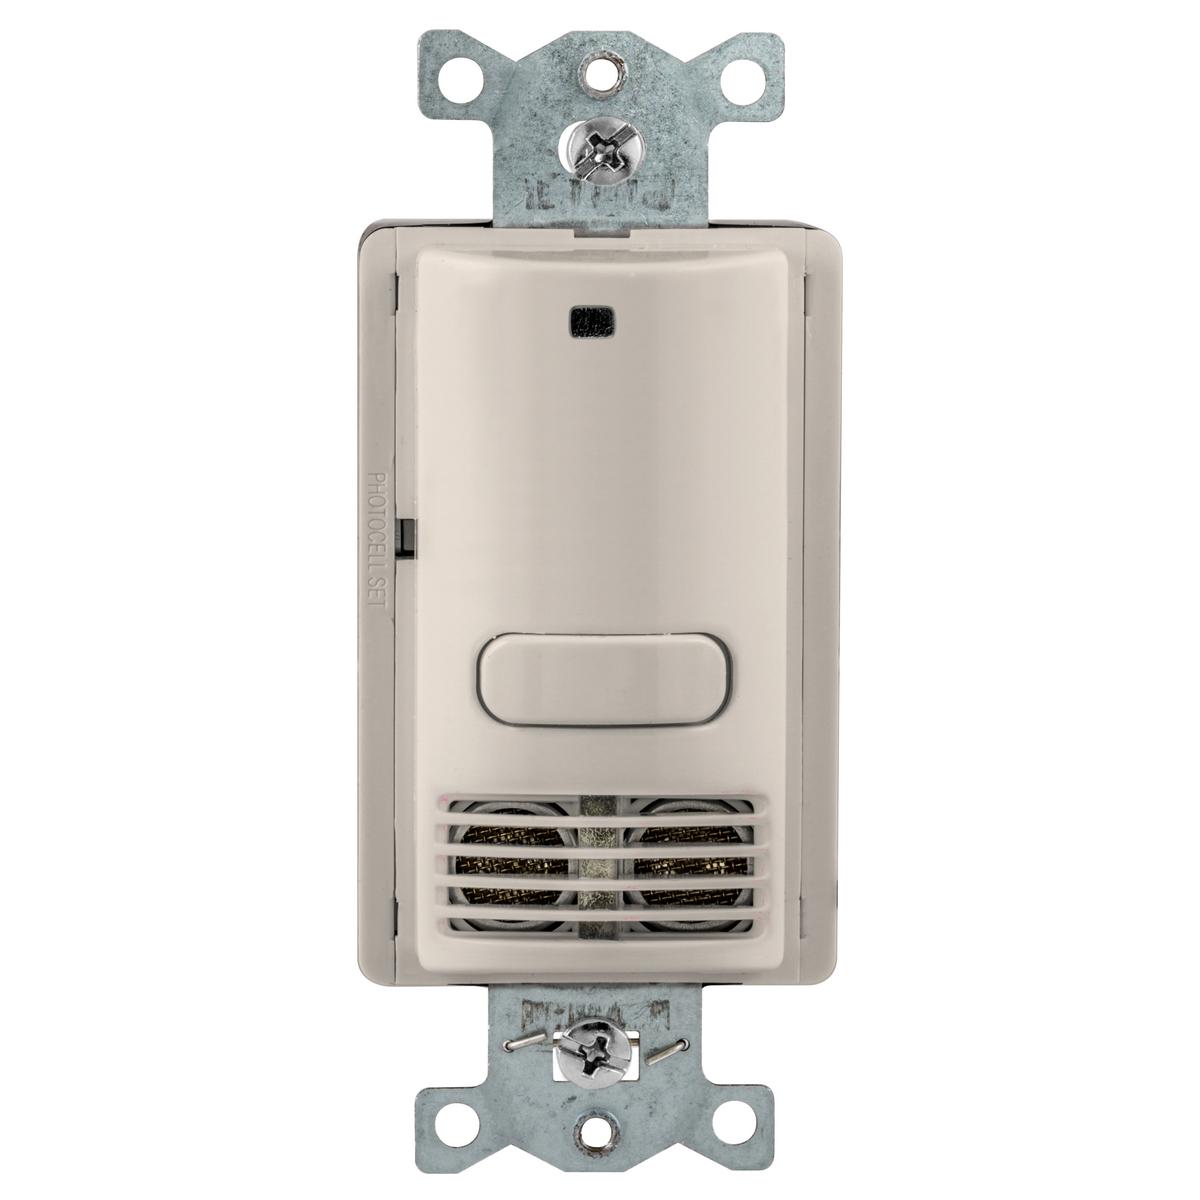 Hubbell AU2000LA1 Occupancy Sensing Products, Wall Switch,Occupancy or Vacancy, Ultrasonic, 1 Relay, 1000 Square Feet,800WIncandescent, 1000W Fluorescent @ 120V AC, 1800W Fluorescent @ 277VAC, 120/277V AC, With Photocell, Light Almond 